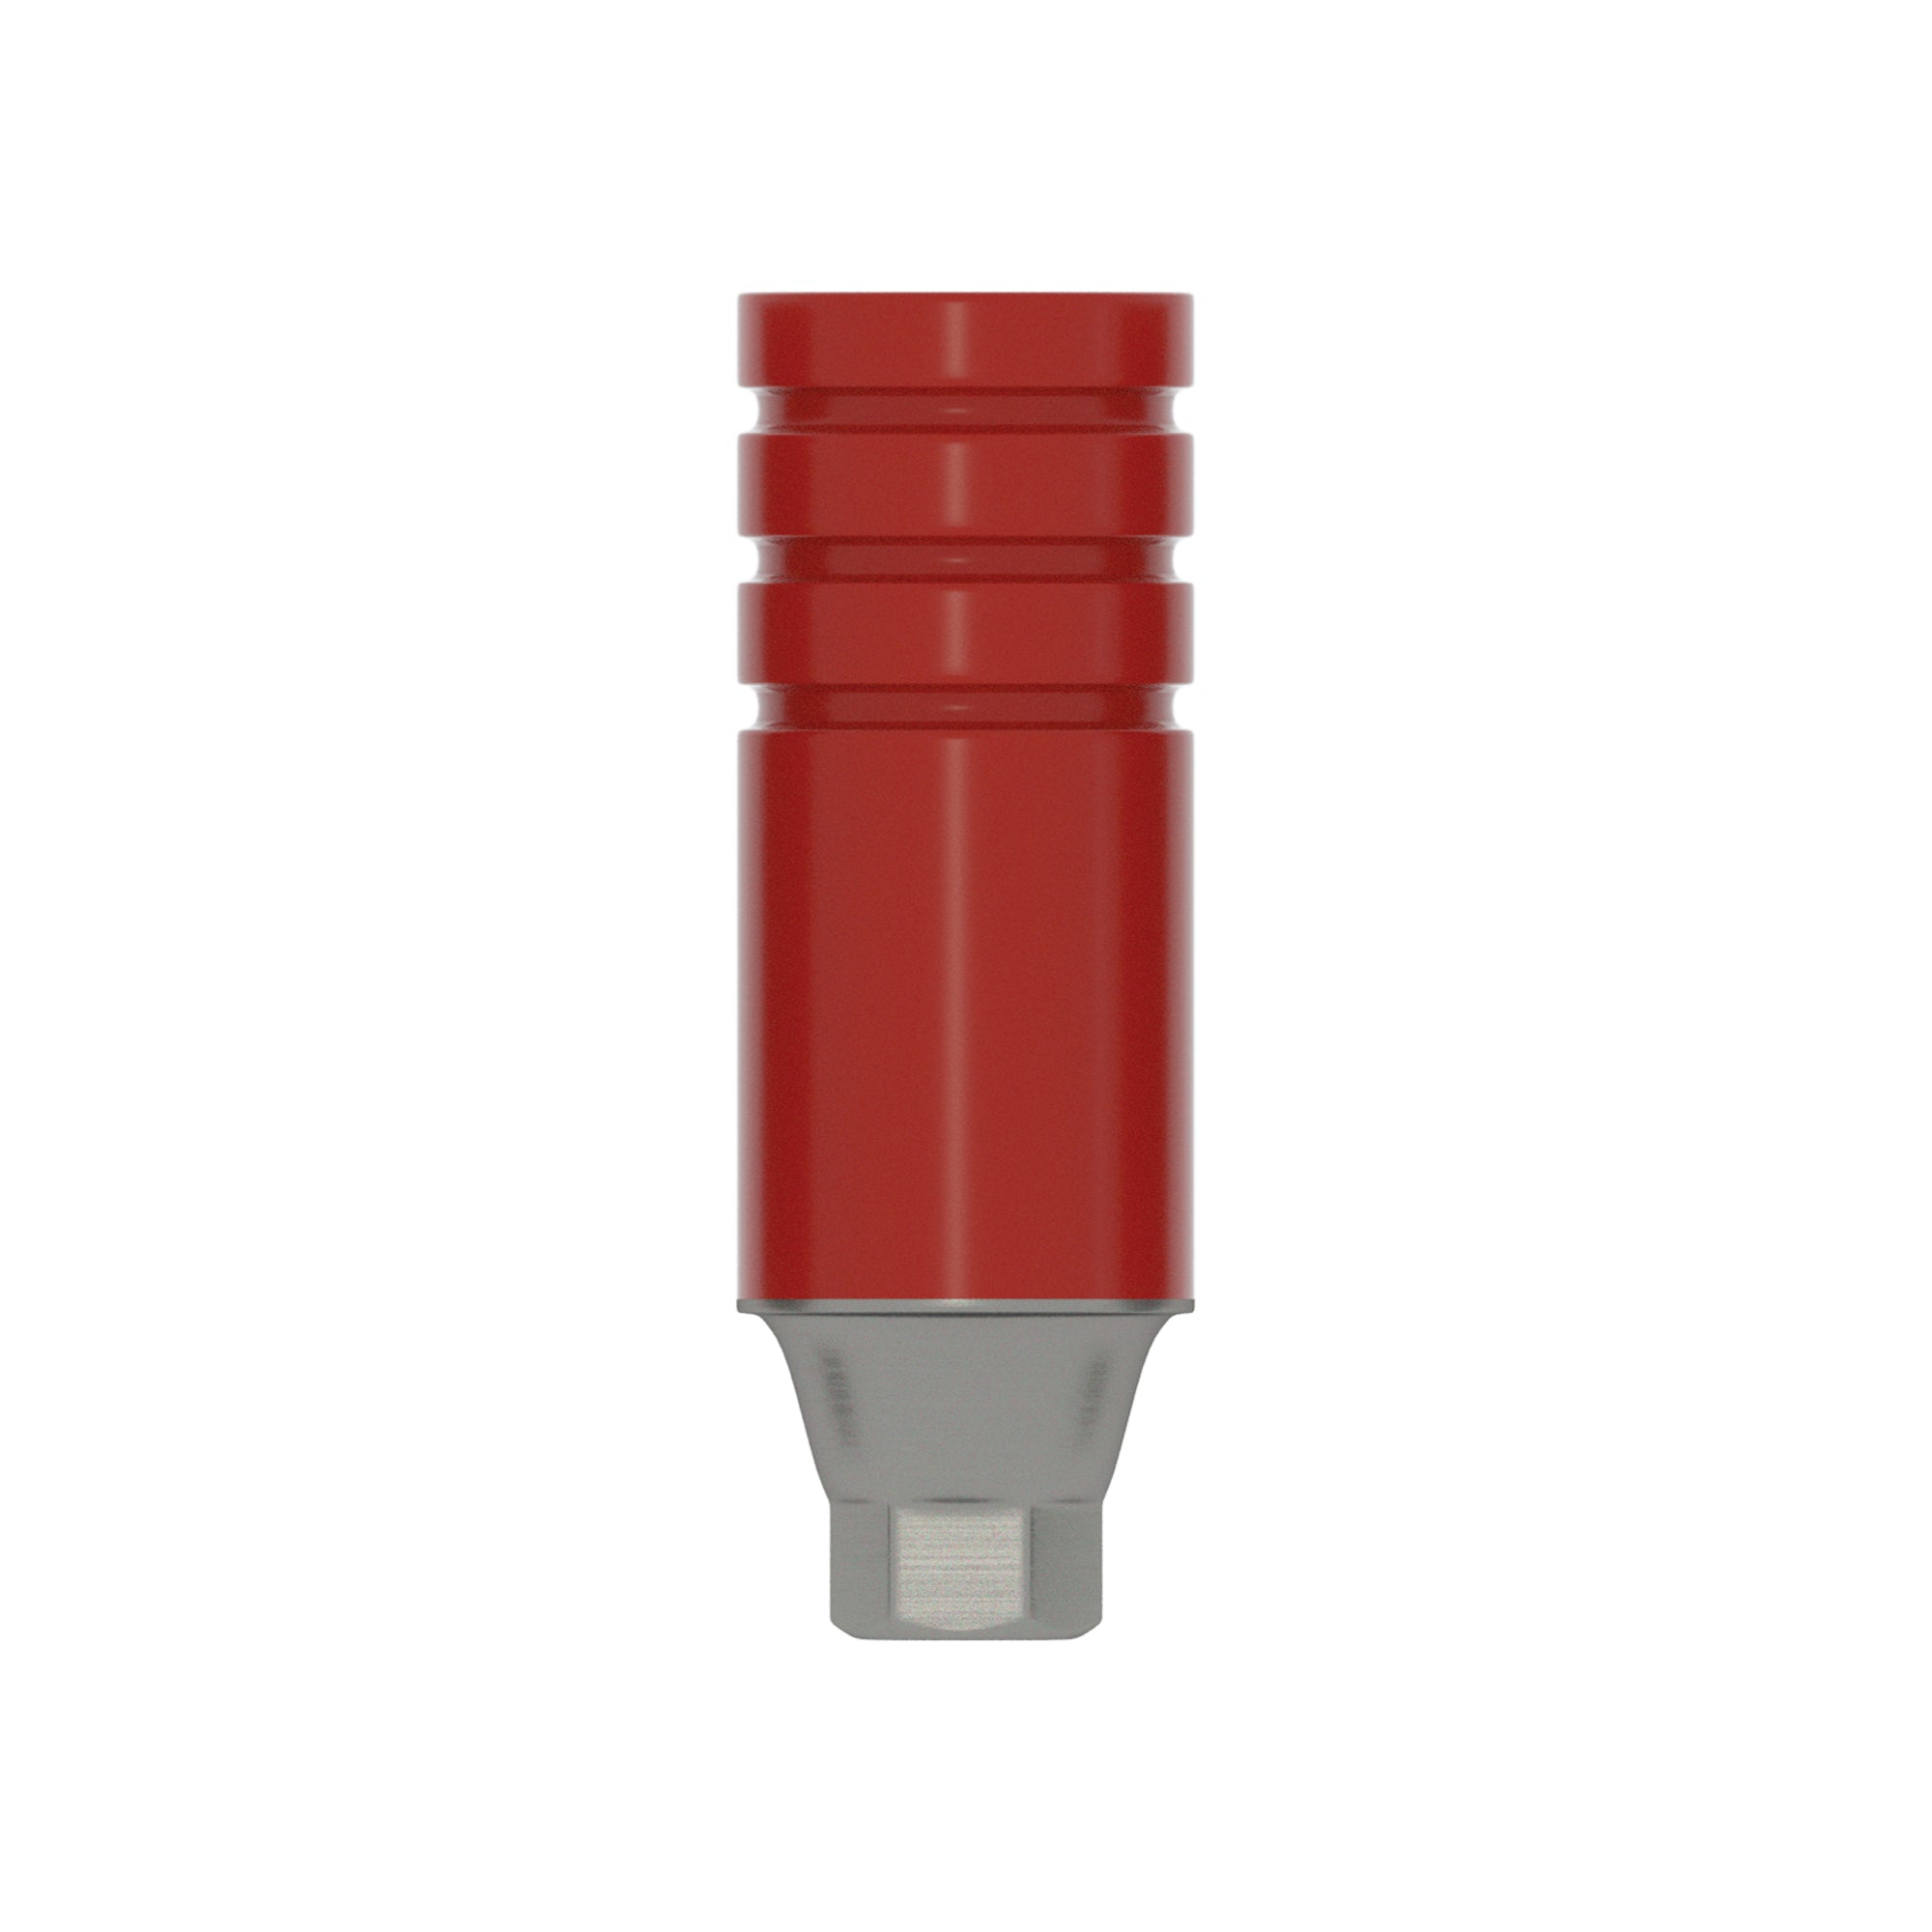 DSI Straight Castable CoCr Abutment (UCLA) 4.5mm -Conical Connection RP Ø4.3mm-5.0mm